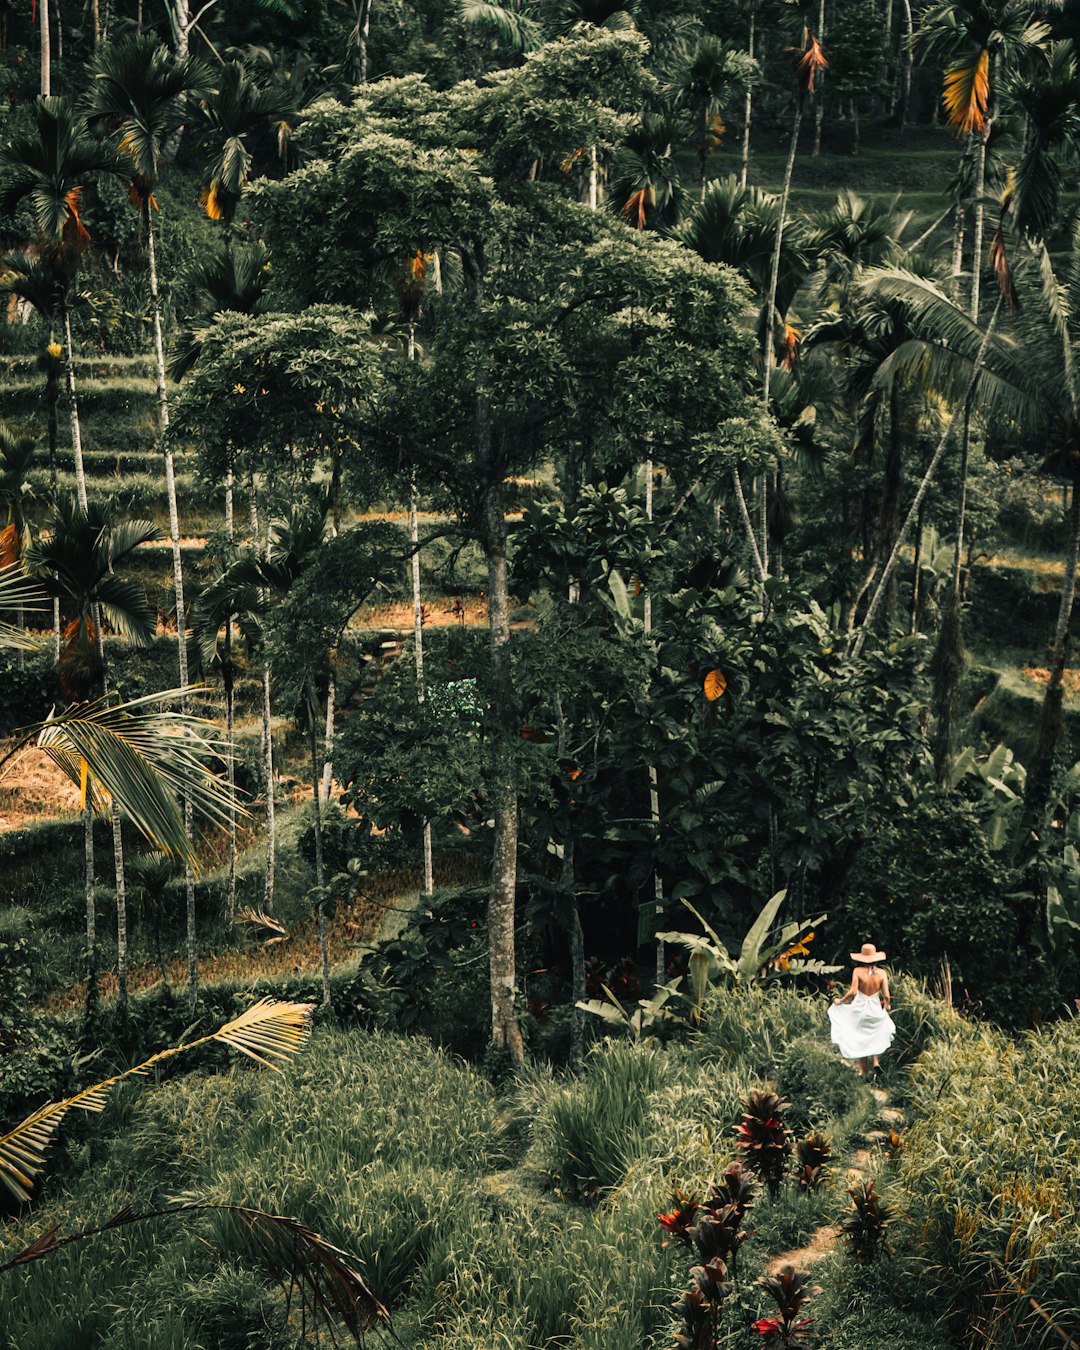 photo of Tegallalang Forest near Bali